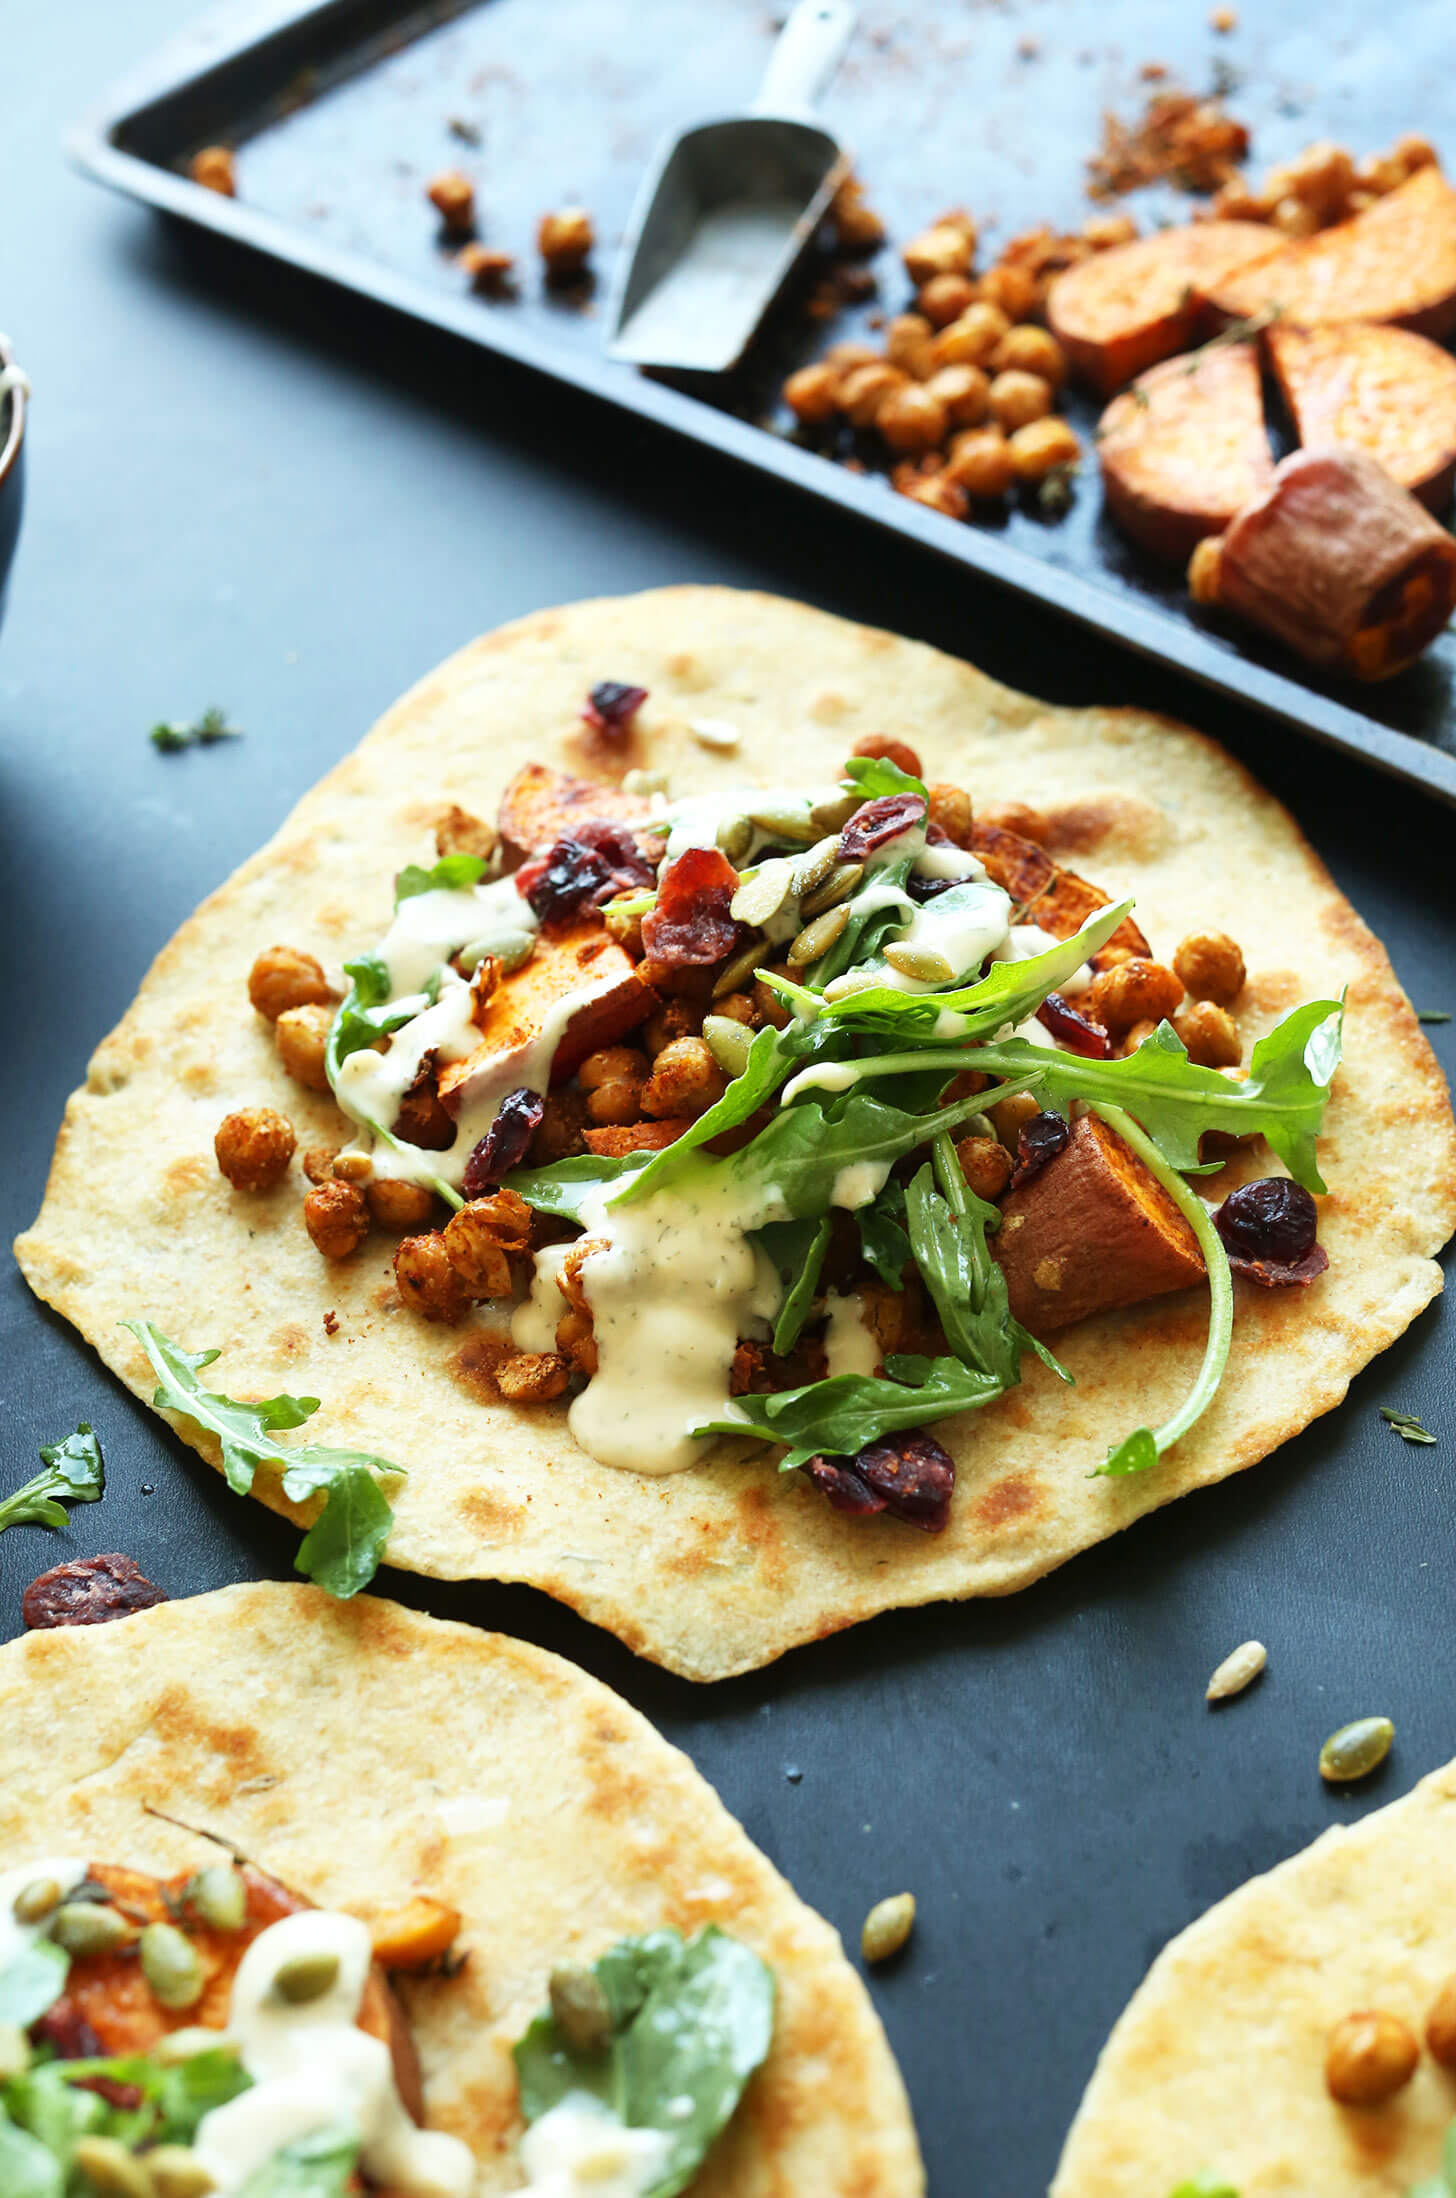 30-minute-FALL-BOUNTY-THANKSGIVING-Wraps-Roasted-Sweet-Potatoes-Chickpeas-with-cranberries-thyme-and-Garlic-Dill-Sauce-vegan-thanksgiving-entree-meal-healthy-recipe-minimalistbaker